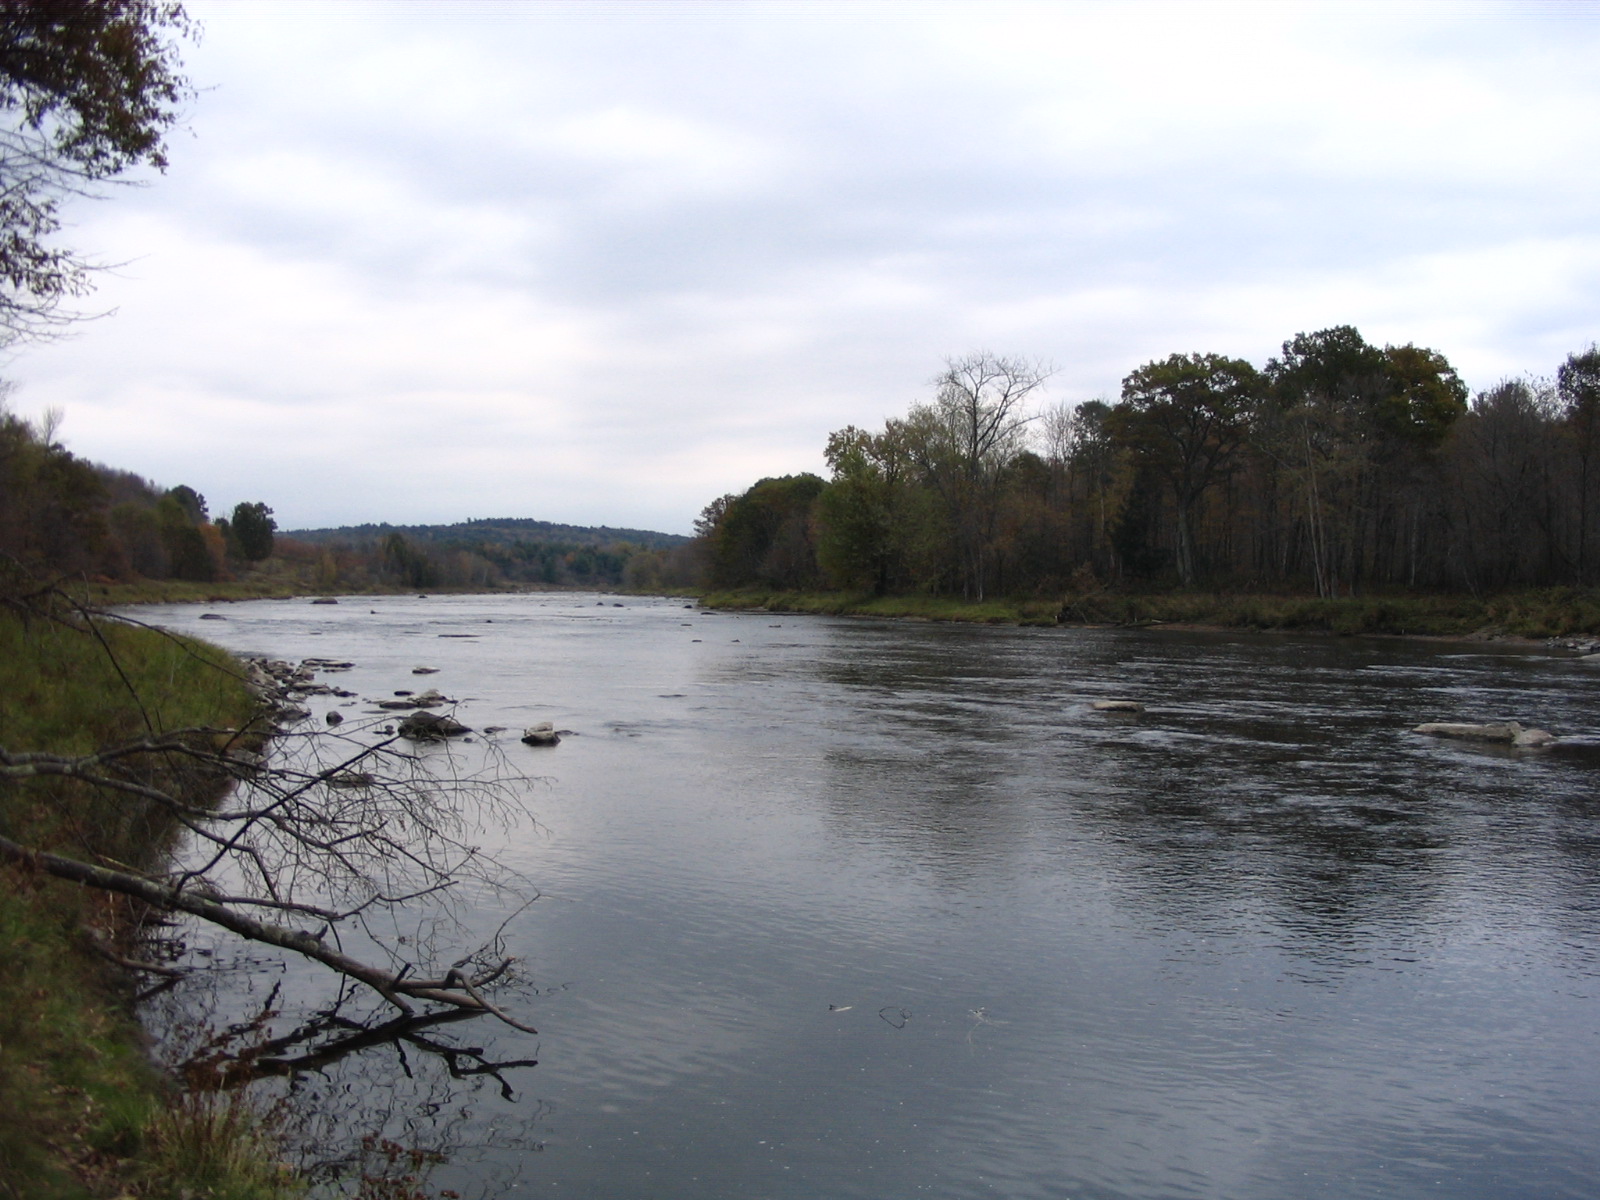 Photograph of the Lamoille River at East Georgia, VT (GEOV1) looking upstream